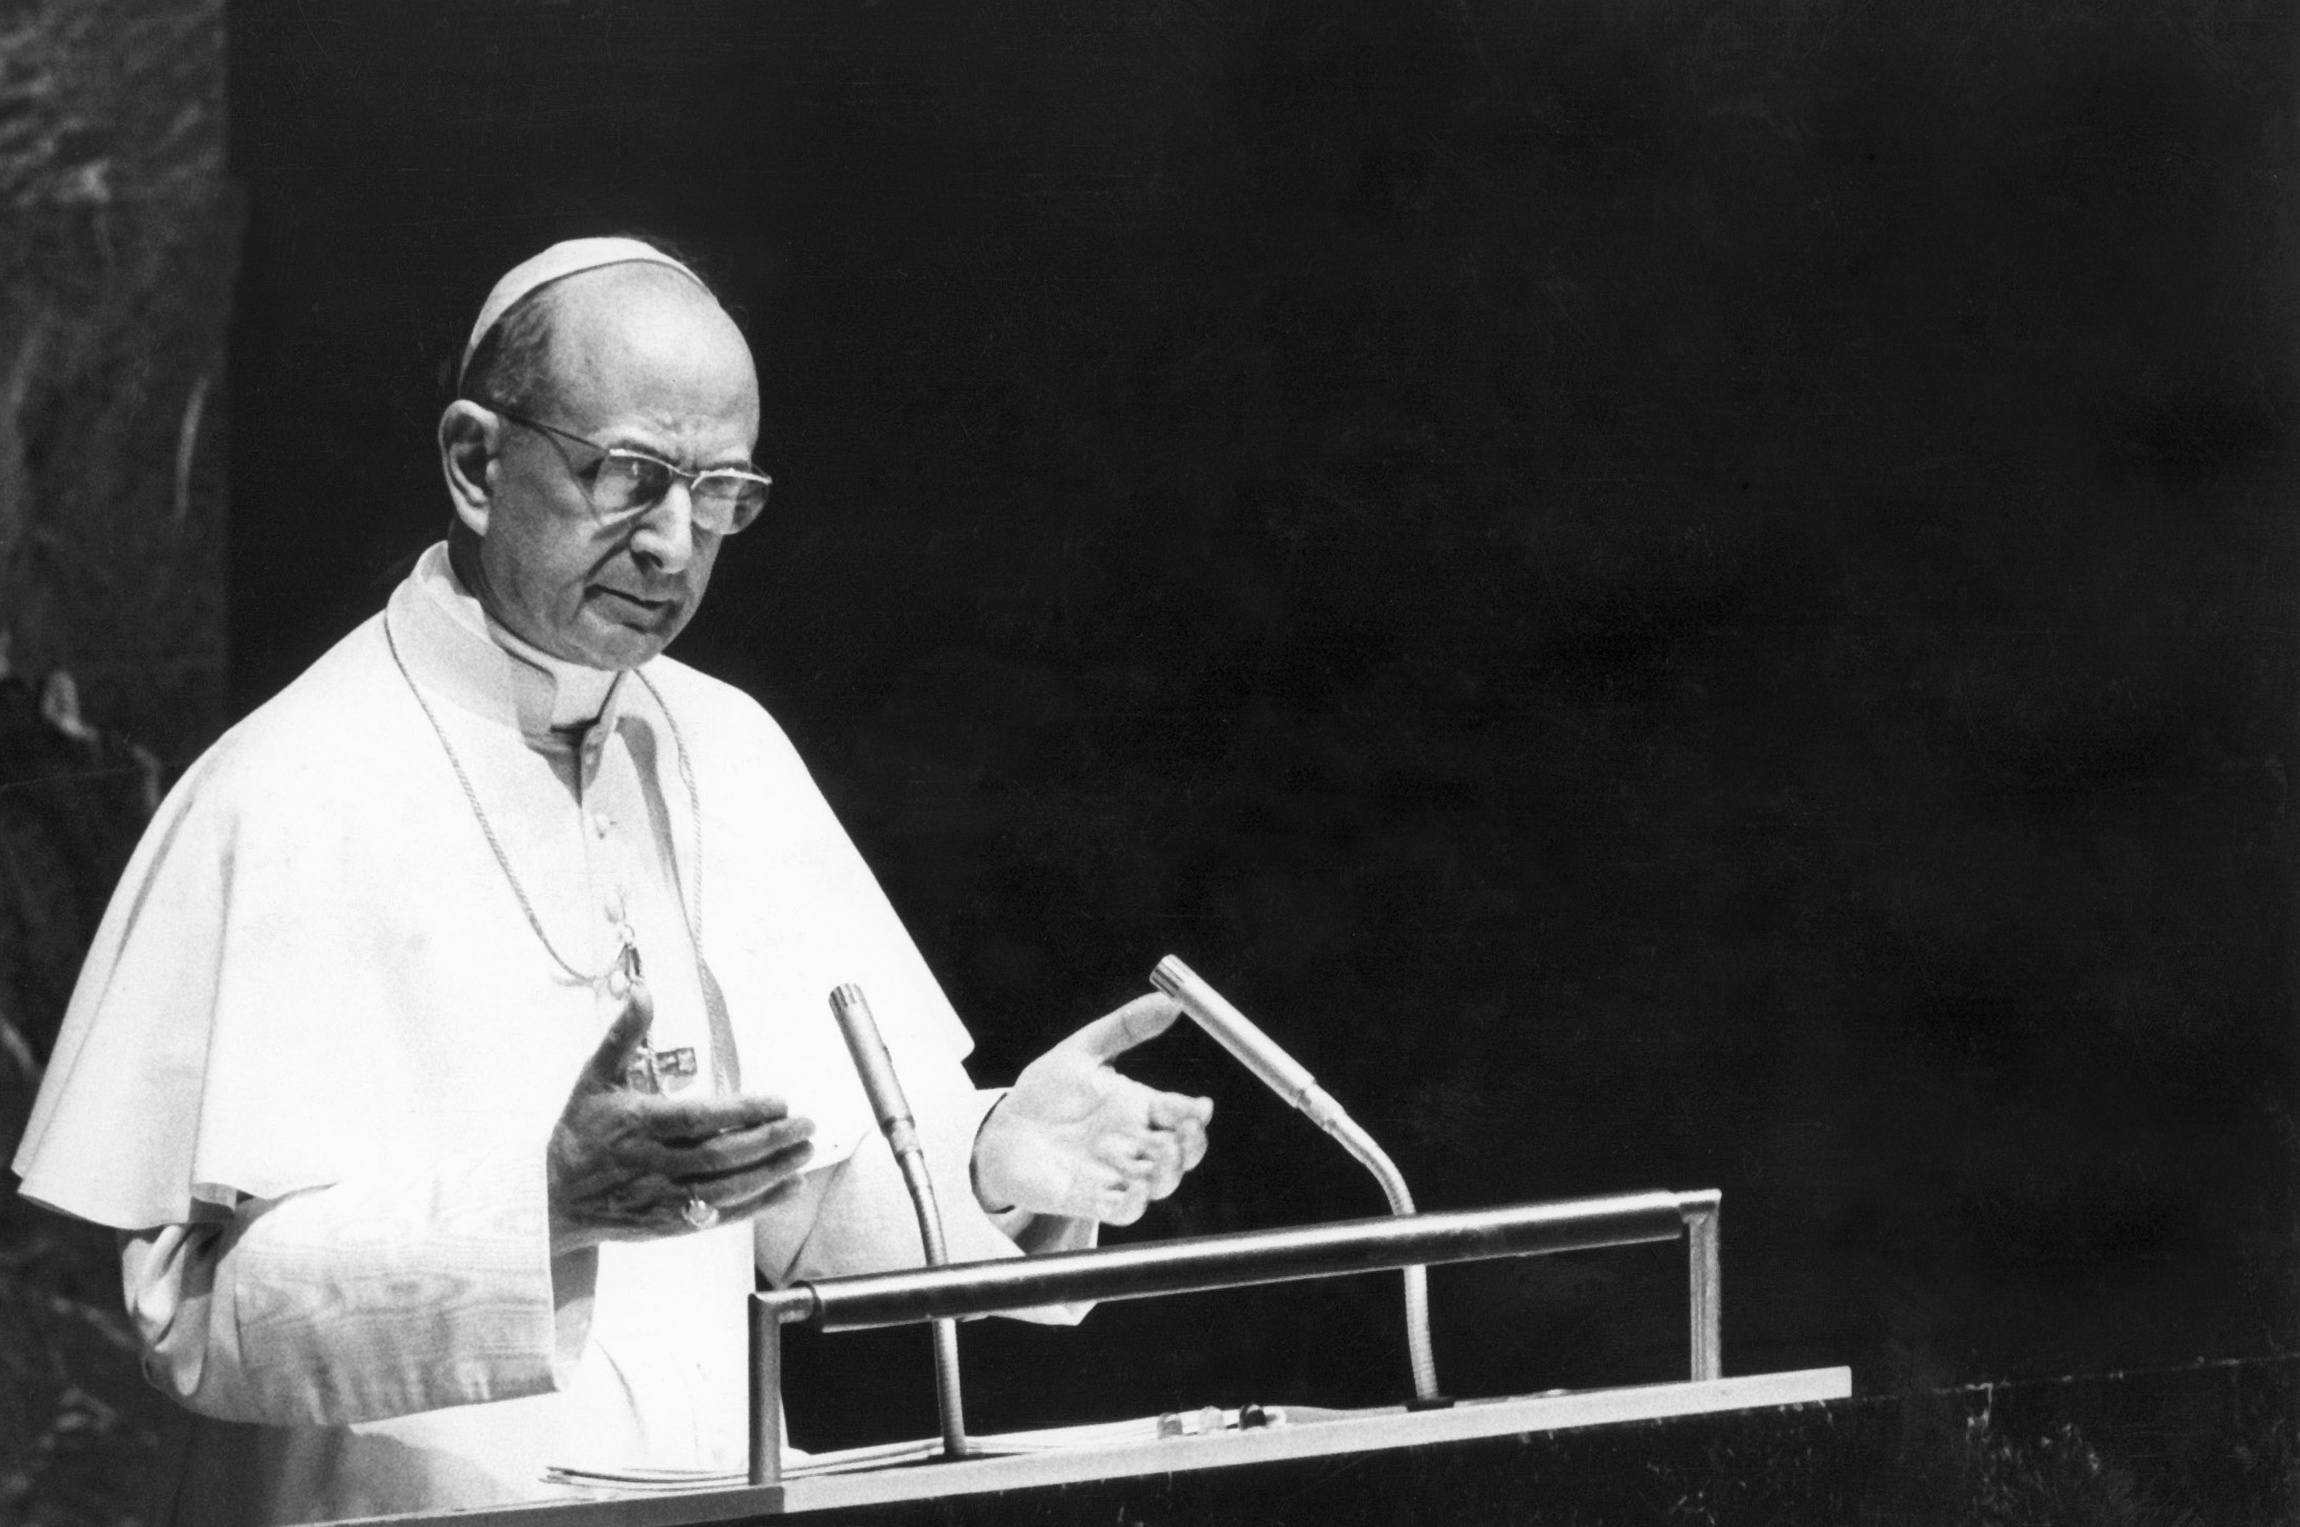 Miracle is approved, paving way for Pope Paul VI to be declared saint